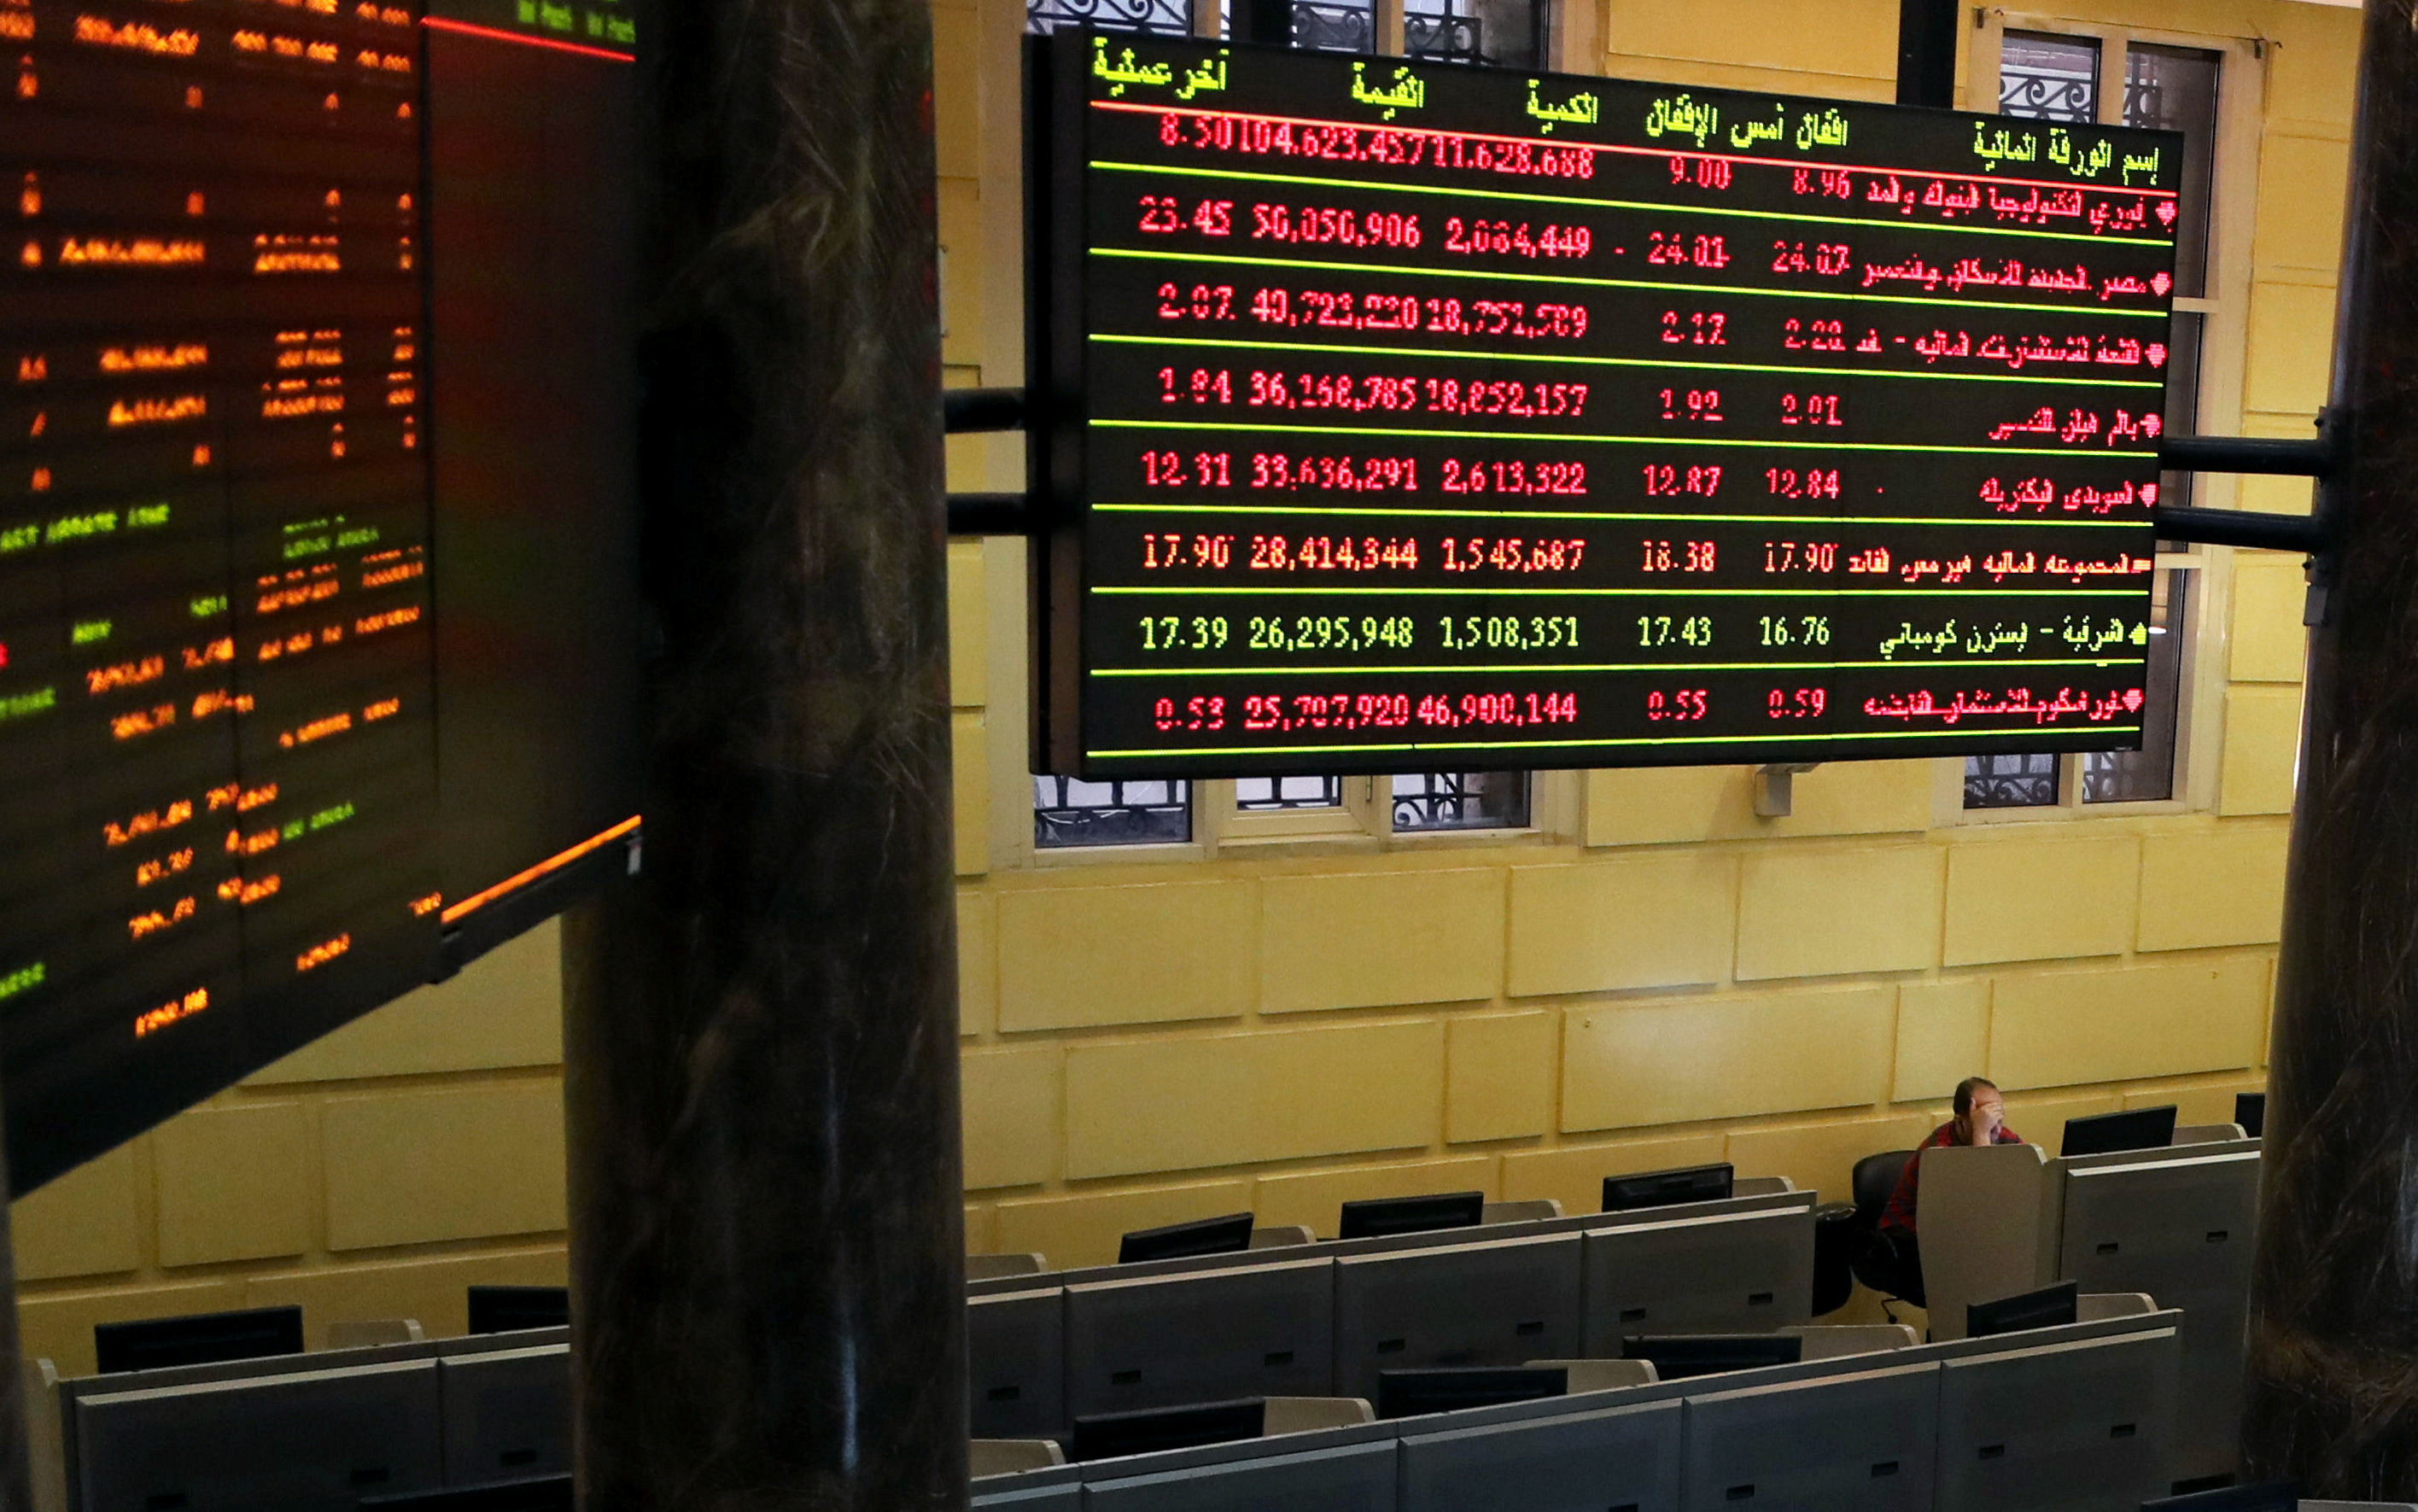 A trader works at the Egyptian stock exchange in Cairo